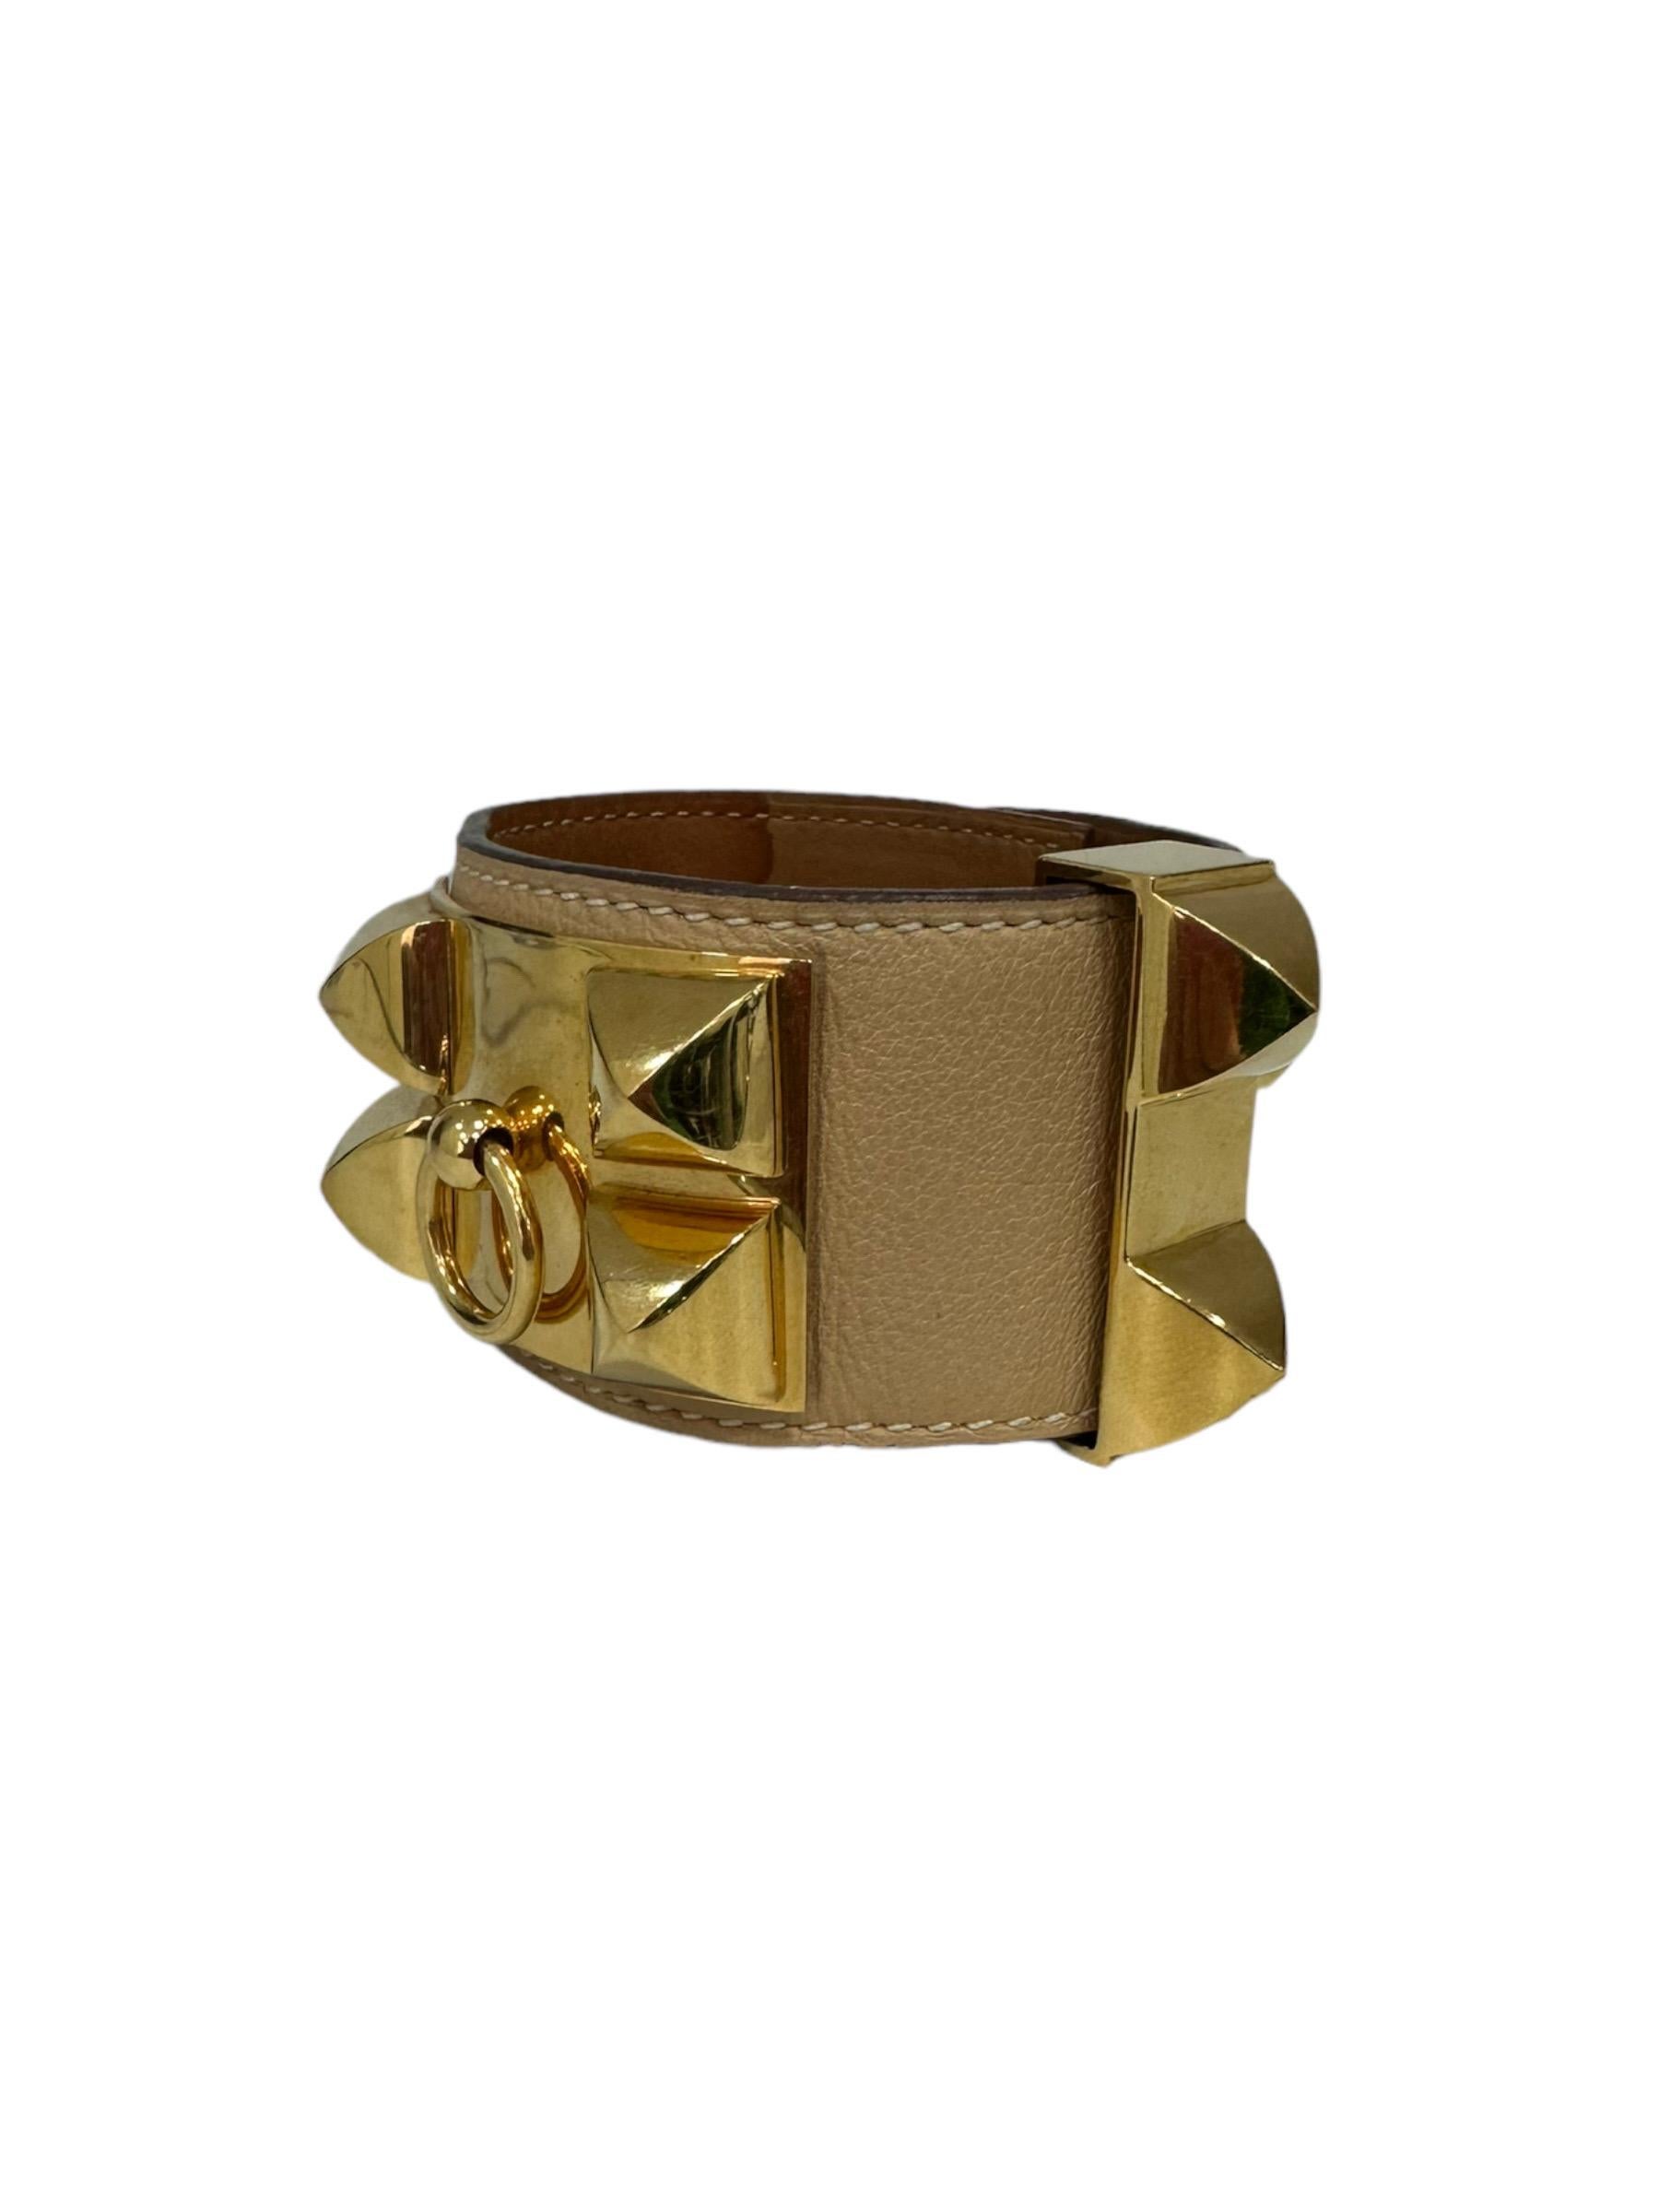 Bracelet signed Hermès, Collier De Chien model, made of Nude Epsom calfskin, with gold hardware. Equipped with an interlocking closure, with golden Médor studs and loops for closure. Measures 21cm in length and 4cm in height. Size S, in good